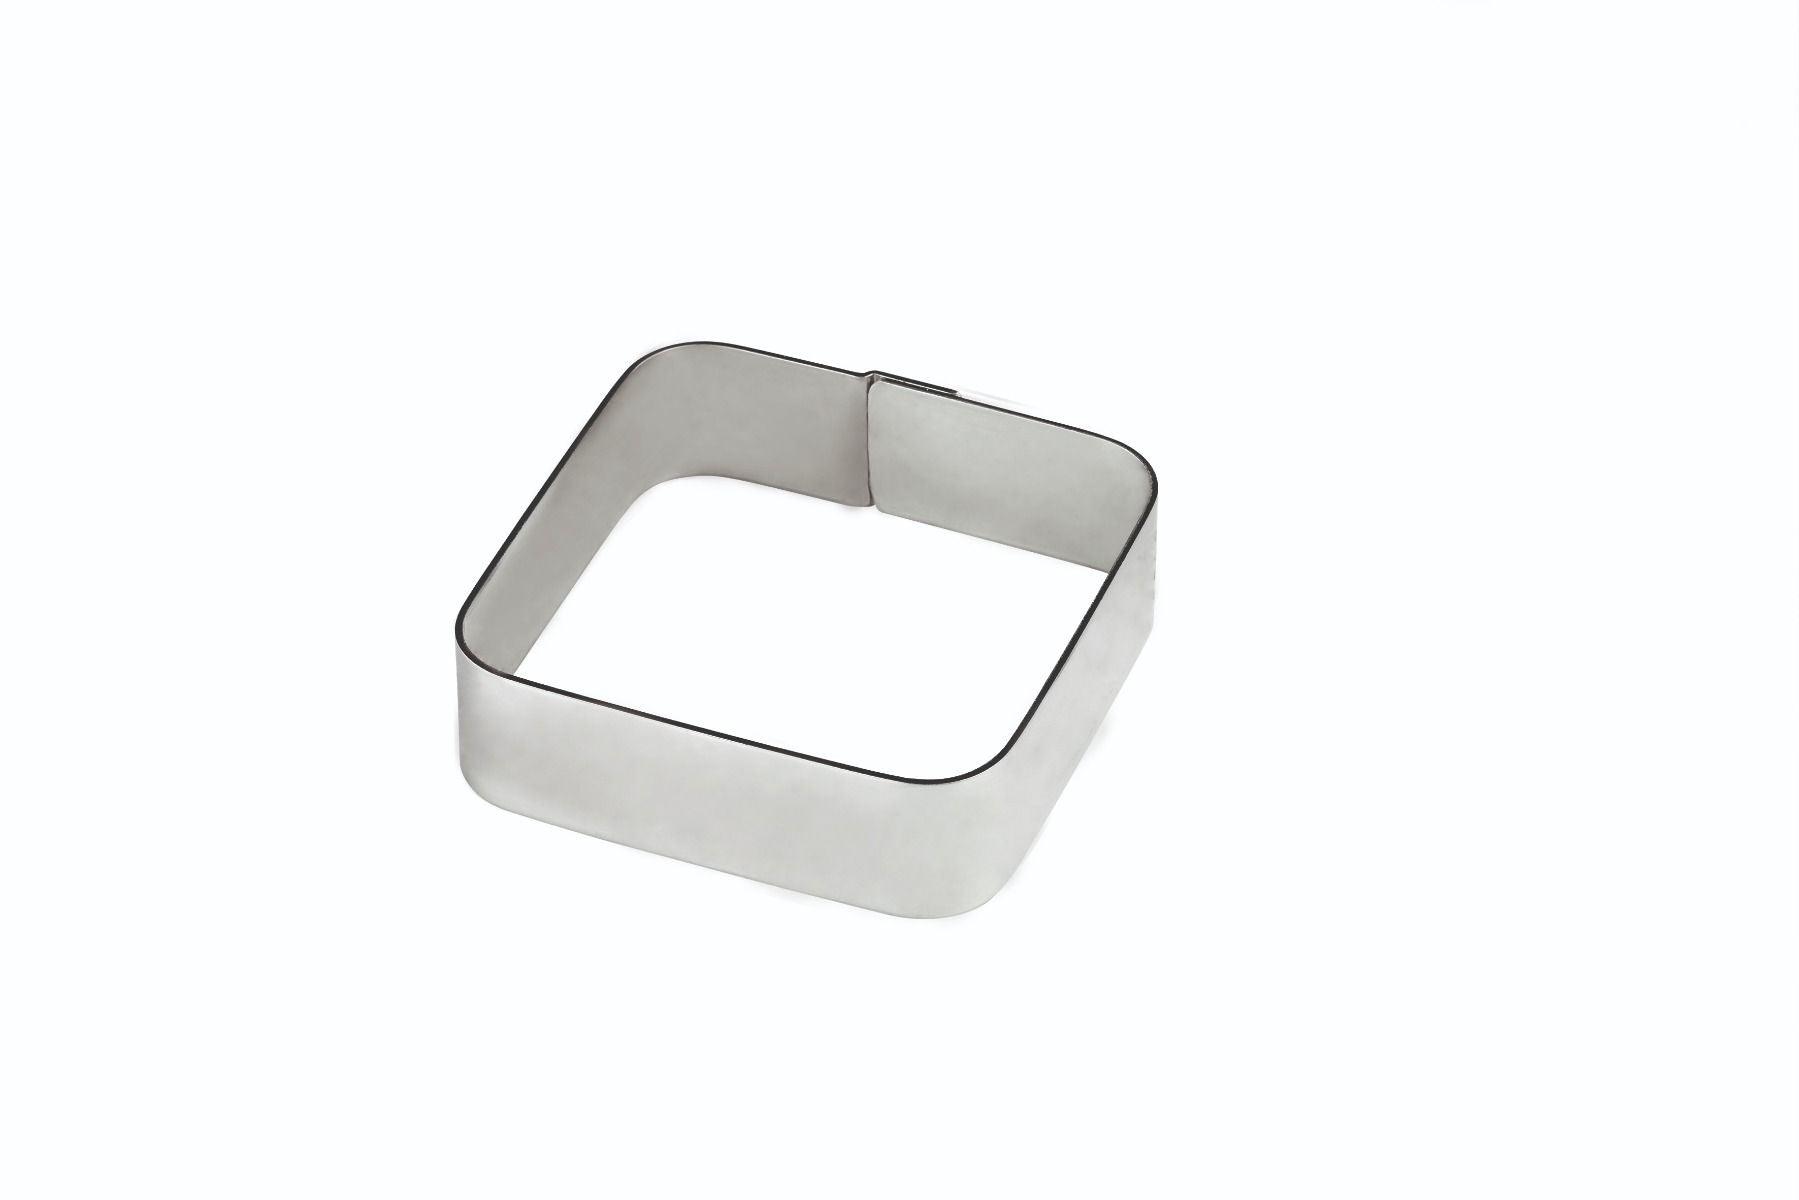 X37 - Smooth stainless steel square bands for single-serving tarts 55 x 55 x
h 20 mm - Zucchero Canada